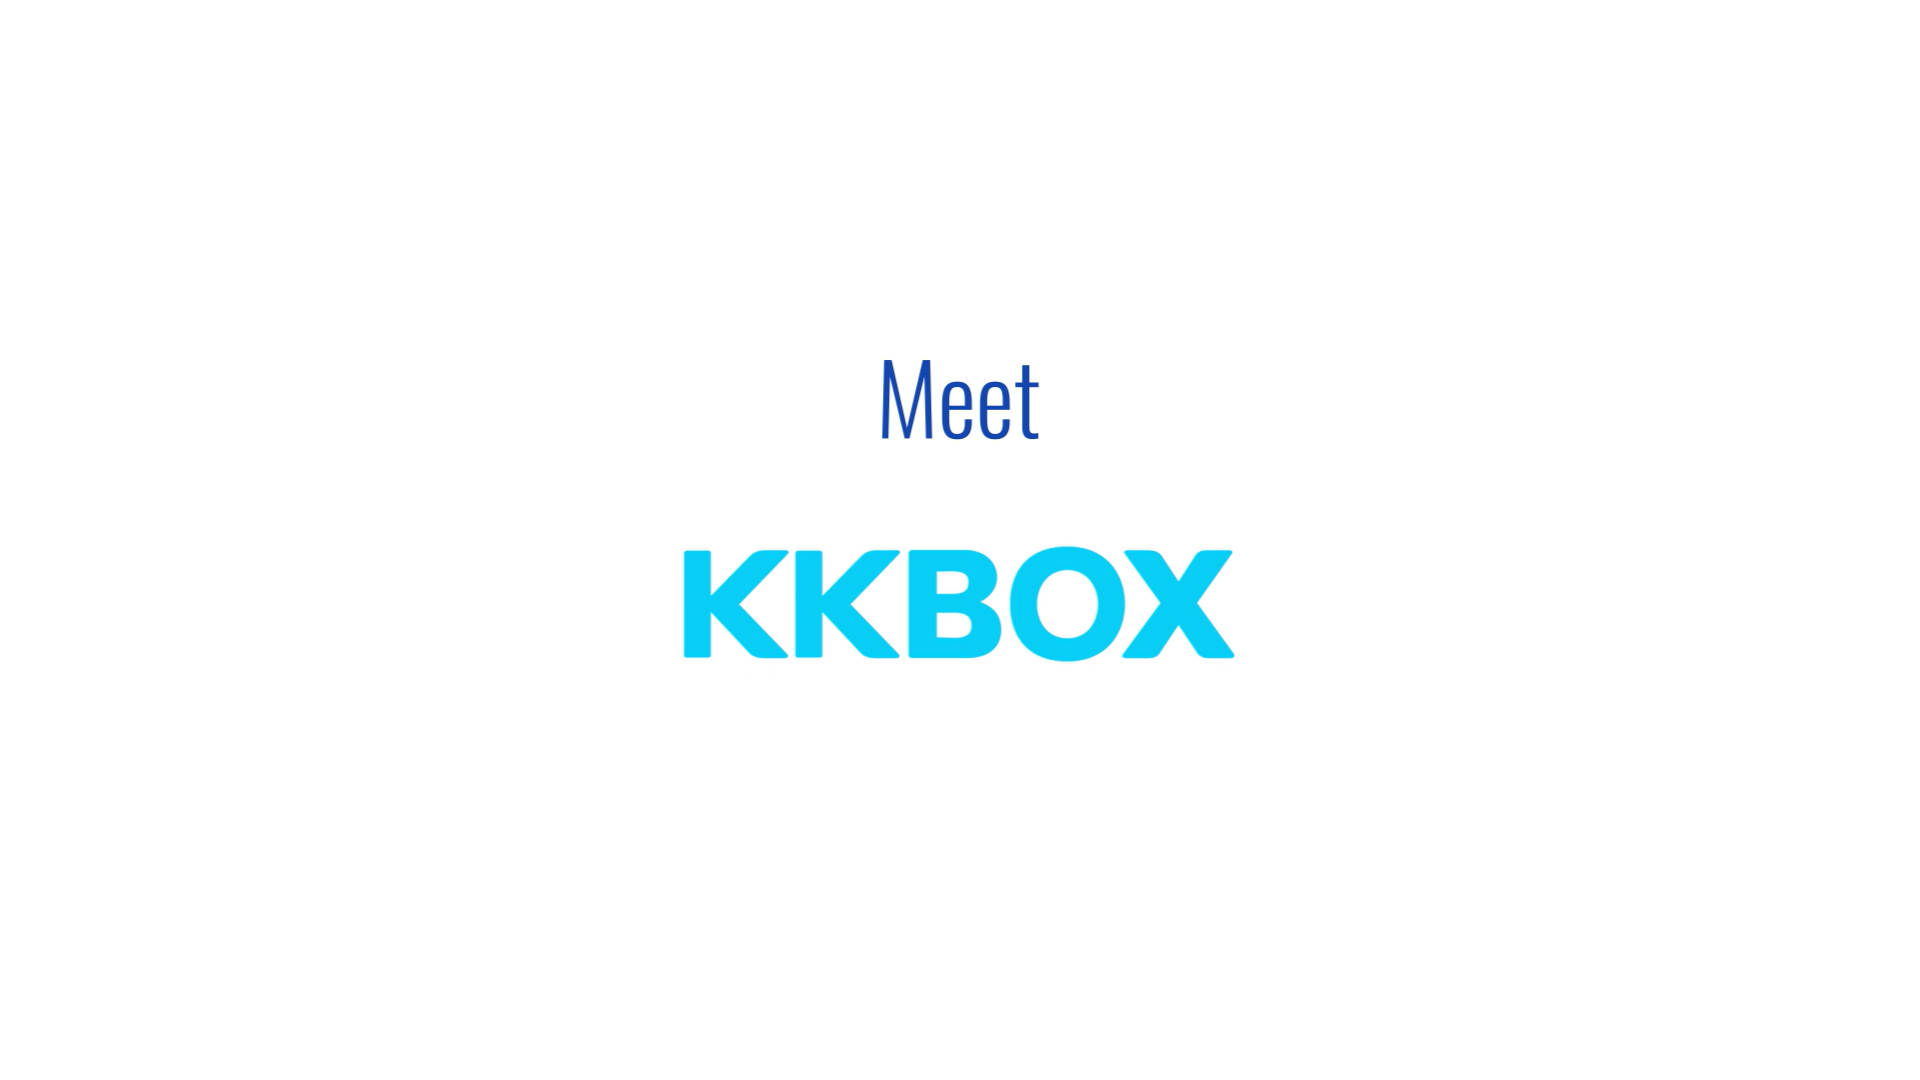 RouteNote partners with KKBOX for worldwide, free music distribution